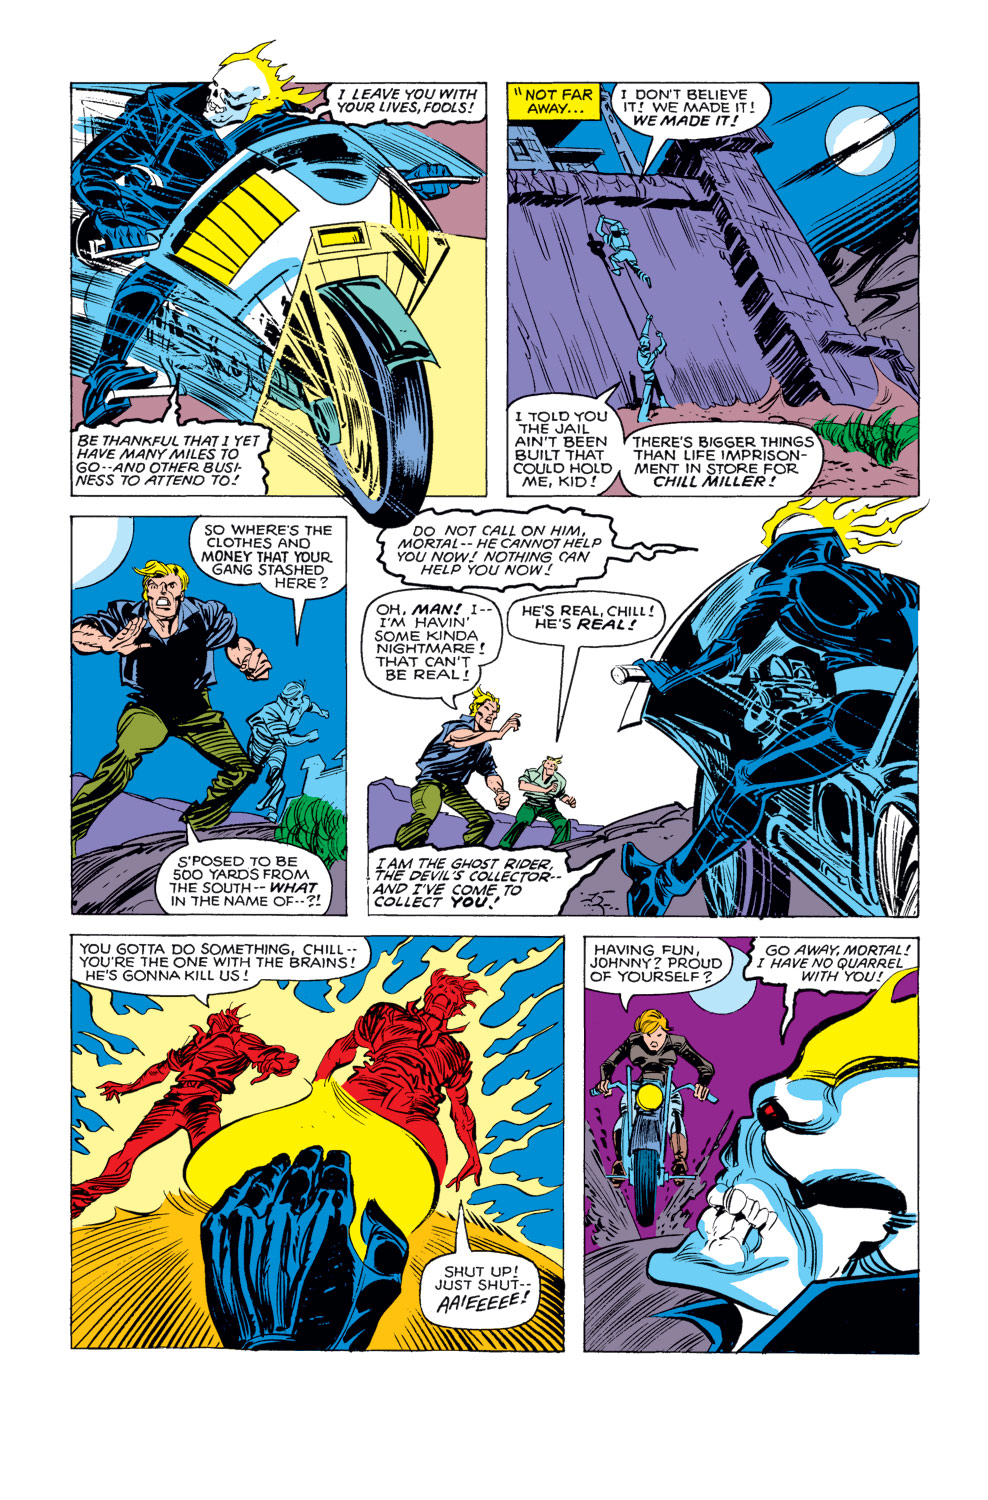 What If? (1977) issue 17 - Ghost Rider, Spider-Woman and Captain Marvel were villains - Page 11